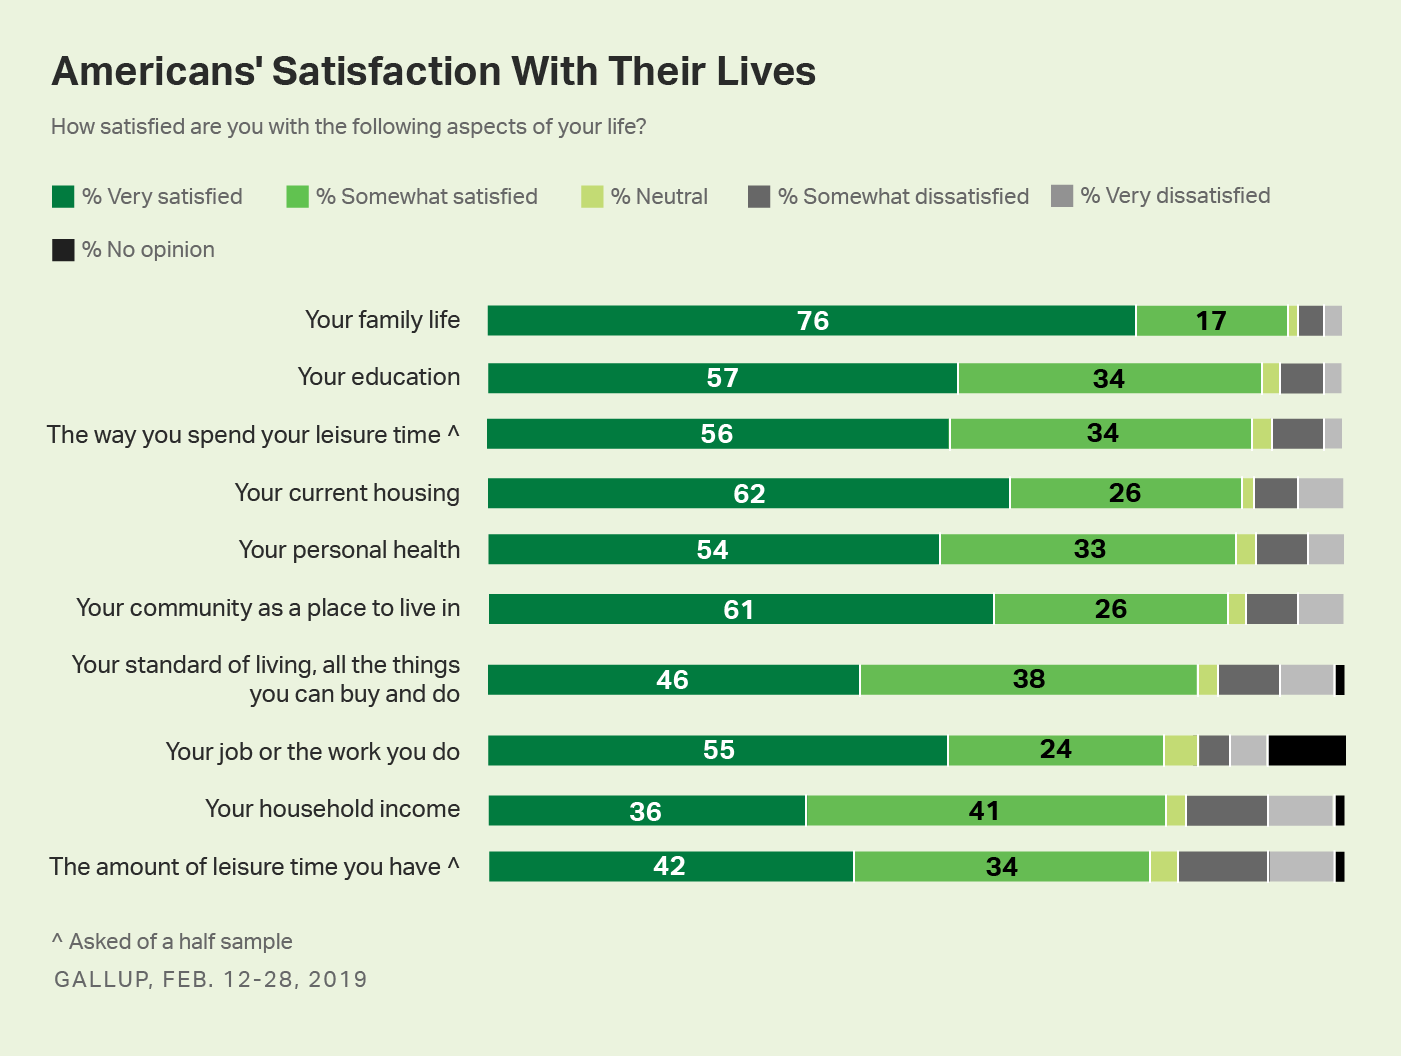 Bar chart. Americans’ satisfaction with 10 life aspects related to their finances, lifestyle, opportunities and social life.